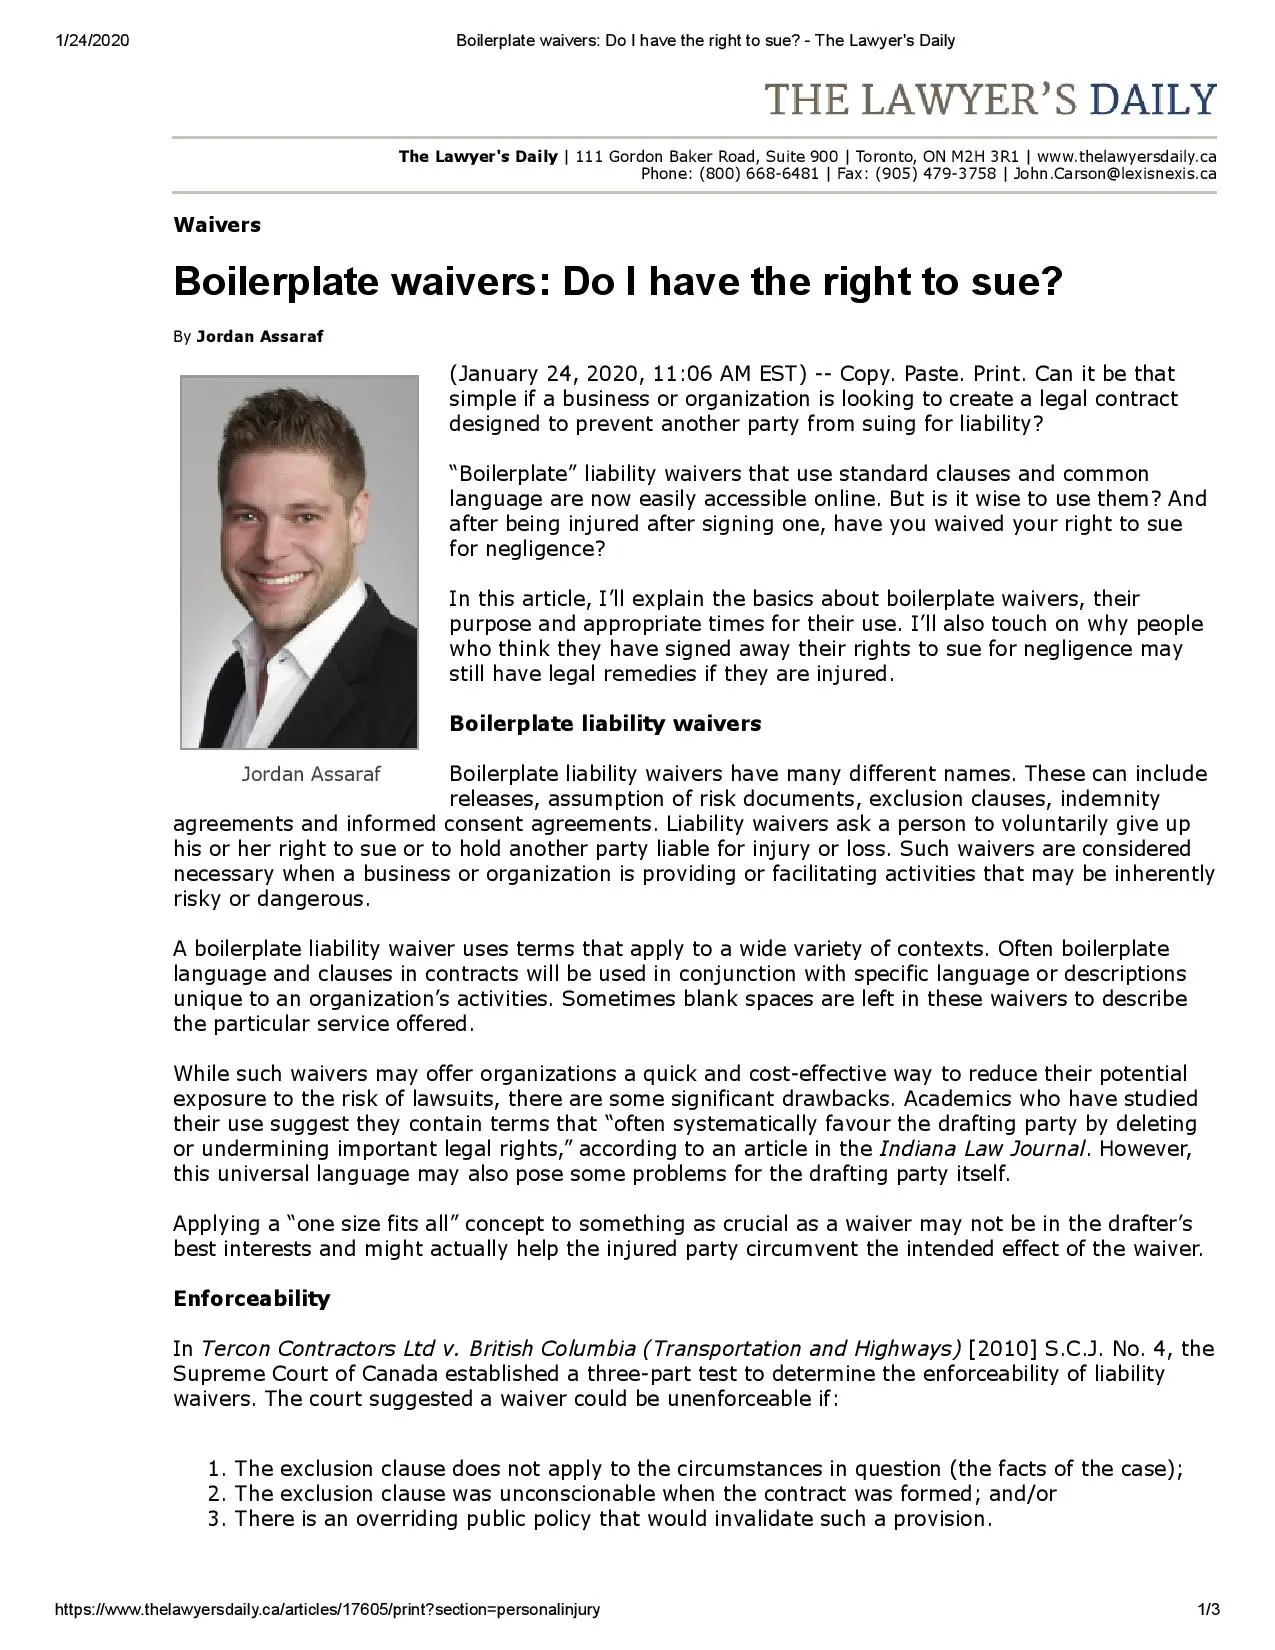 Jordan Assaraf Boilerplate waivers Do I have the right to sue The Lawyer s Daily page 001